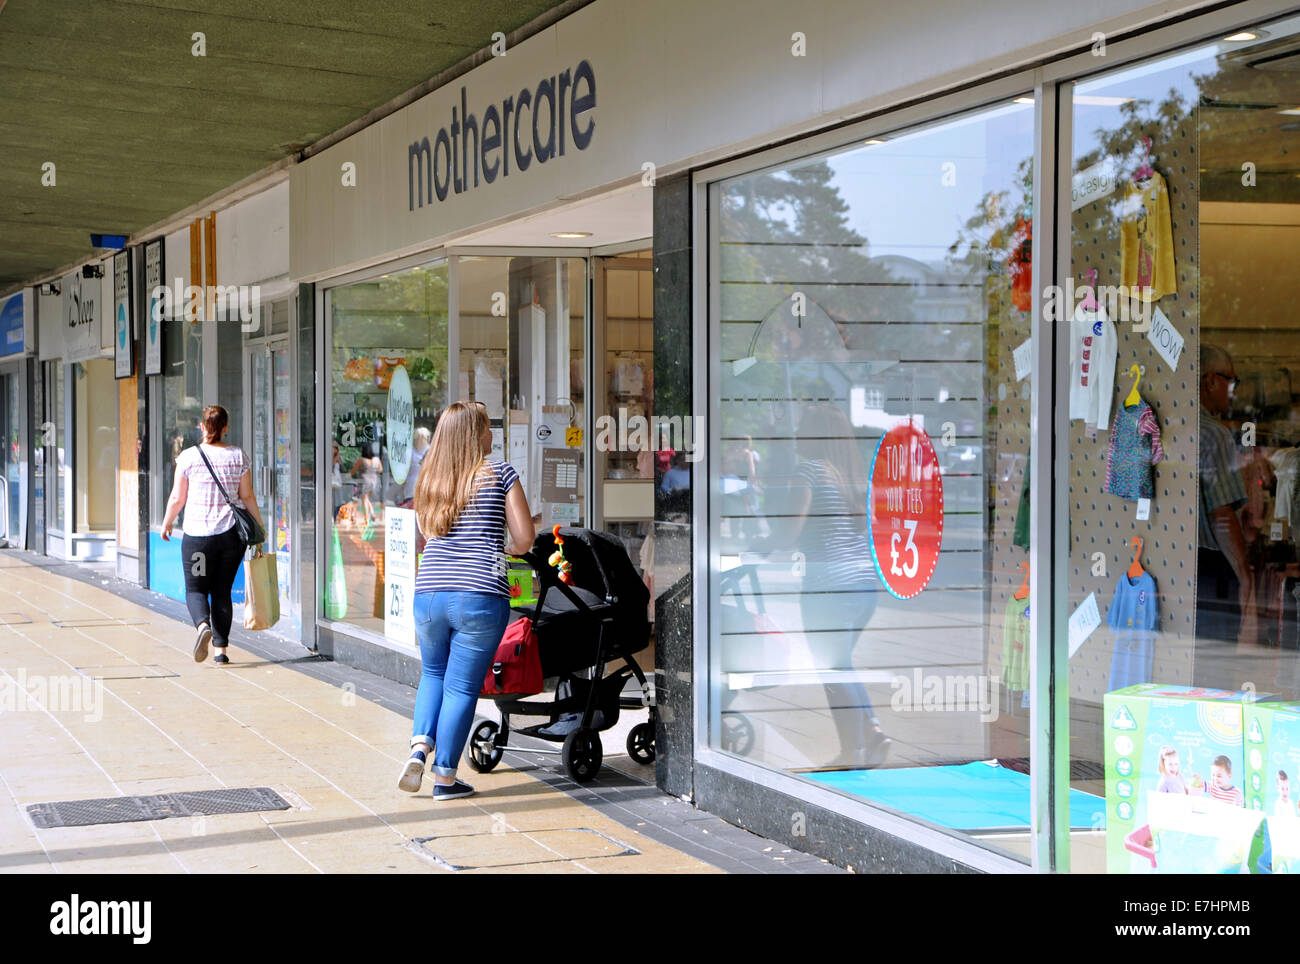 Crawley West Sussex UK - Mothercare store and shop with people Stock Photo